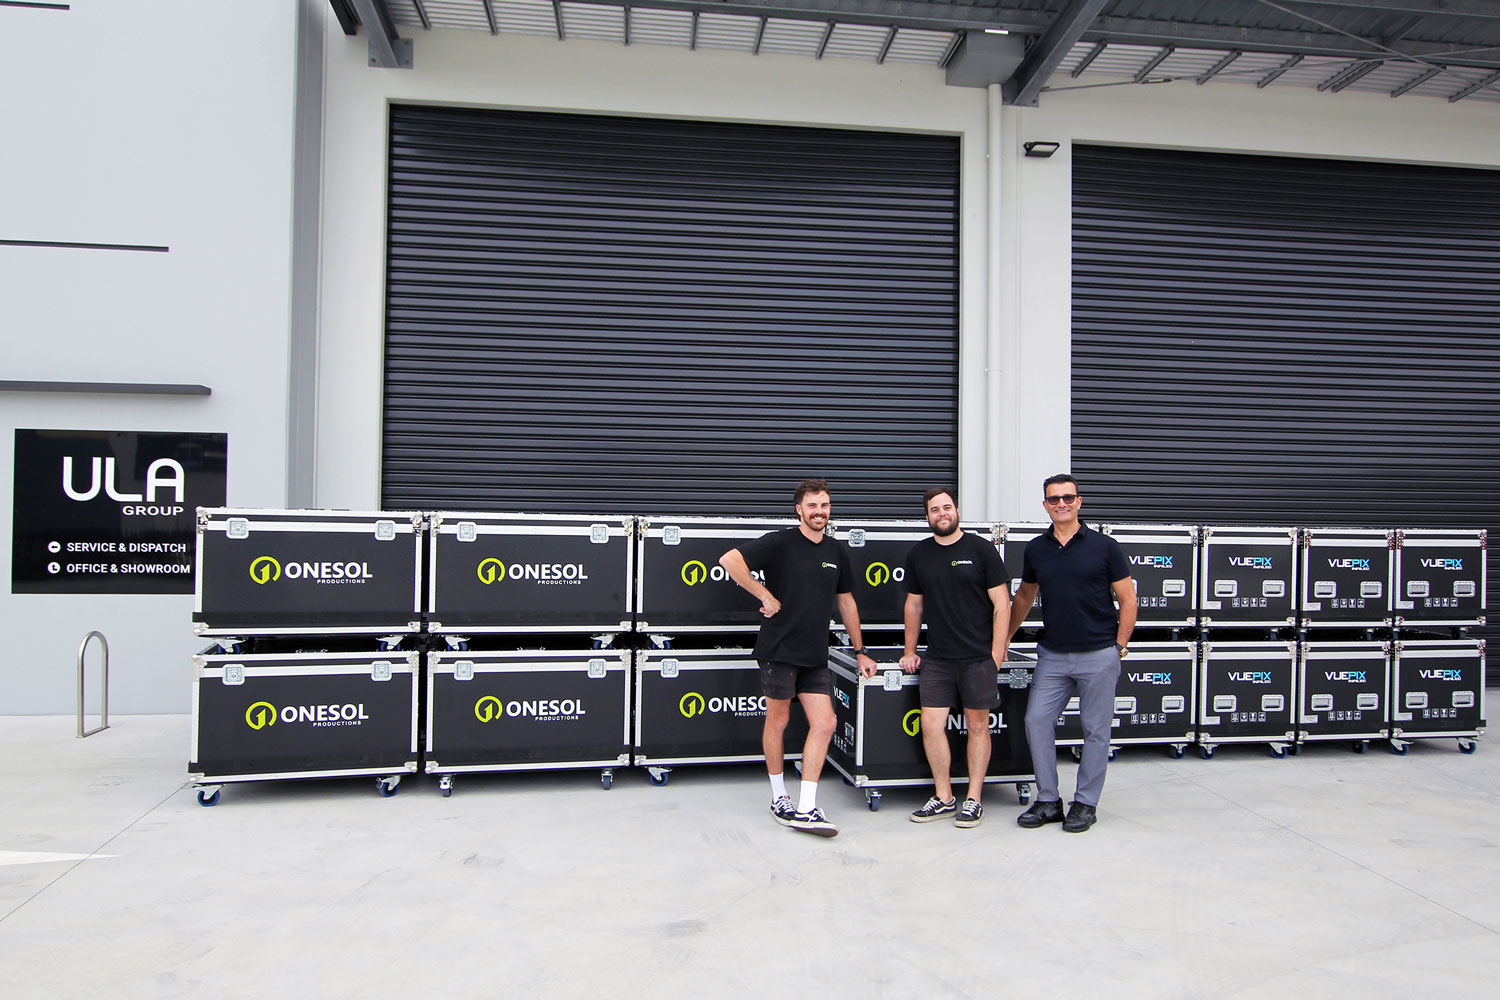 Onesol Staff and ULA Group Director, featured with the newly purchased AR P3 Panels in customised flight cases